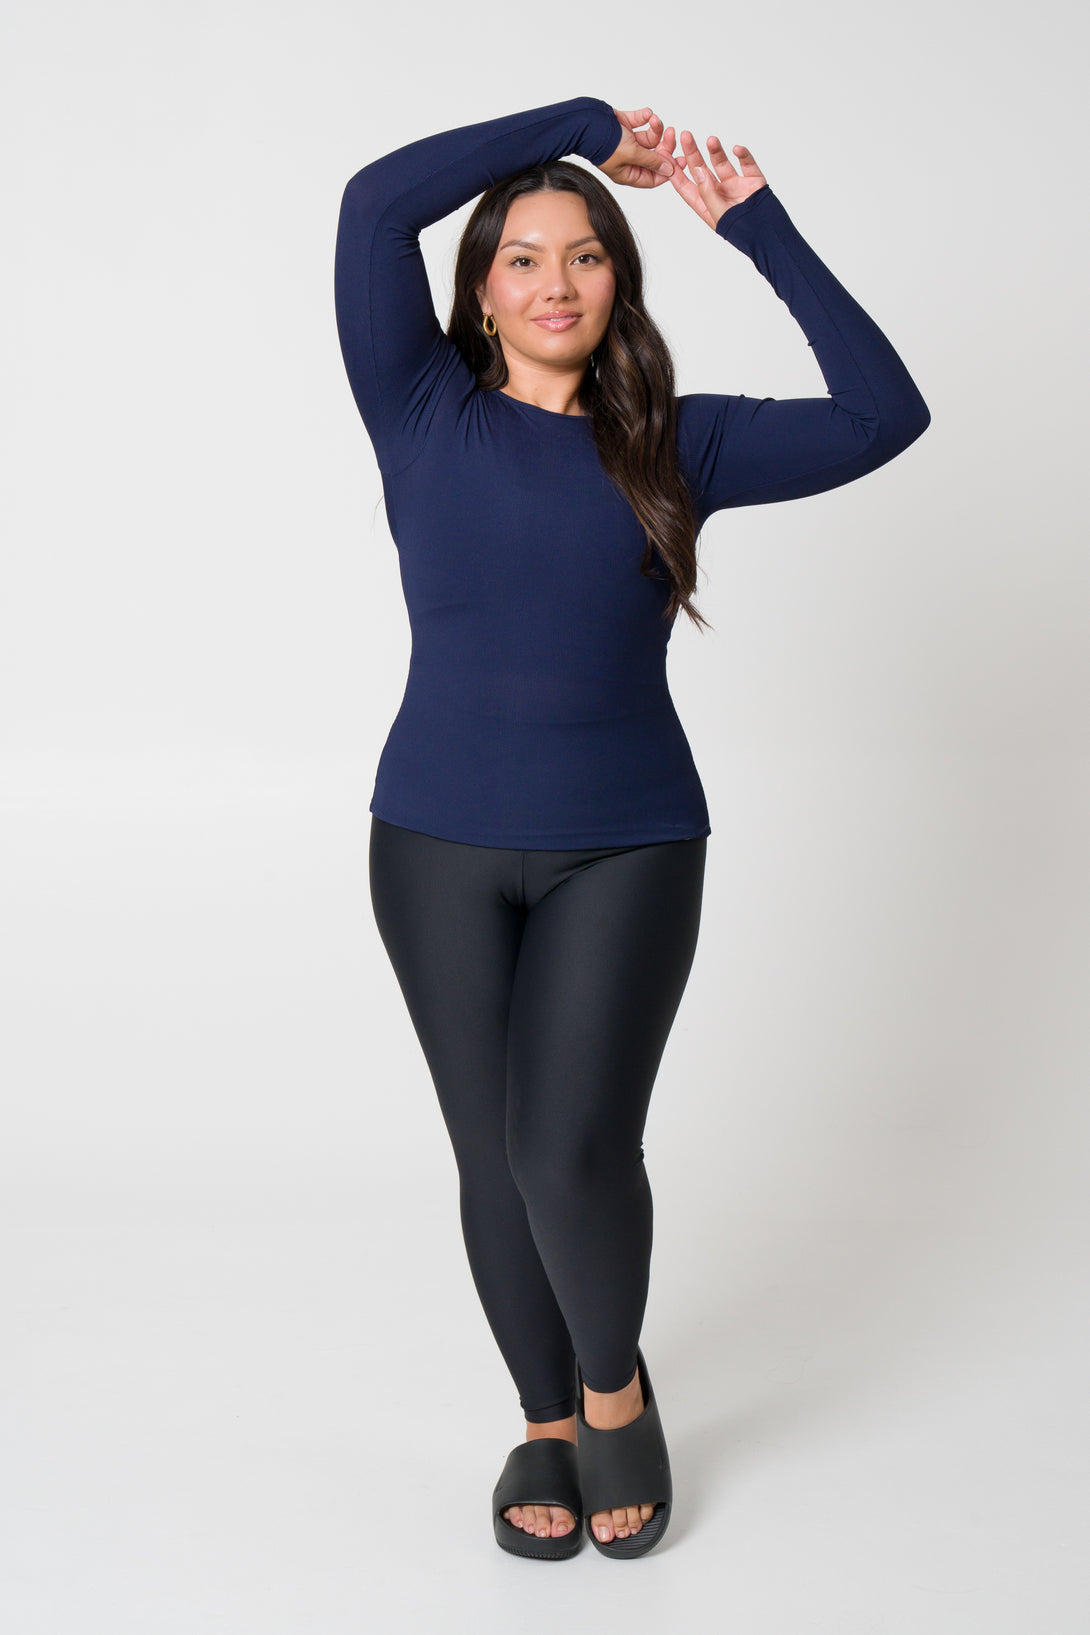 Navy Rib Knit - Fitted Long Sleeve Tee - Exoticathletica